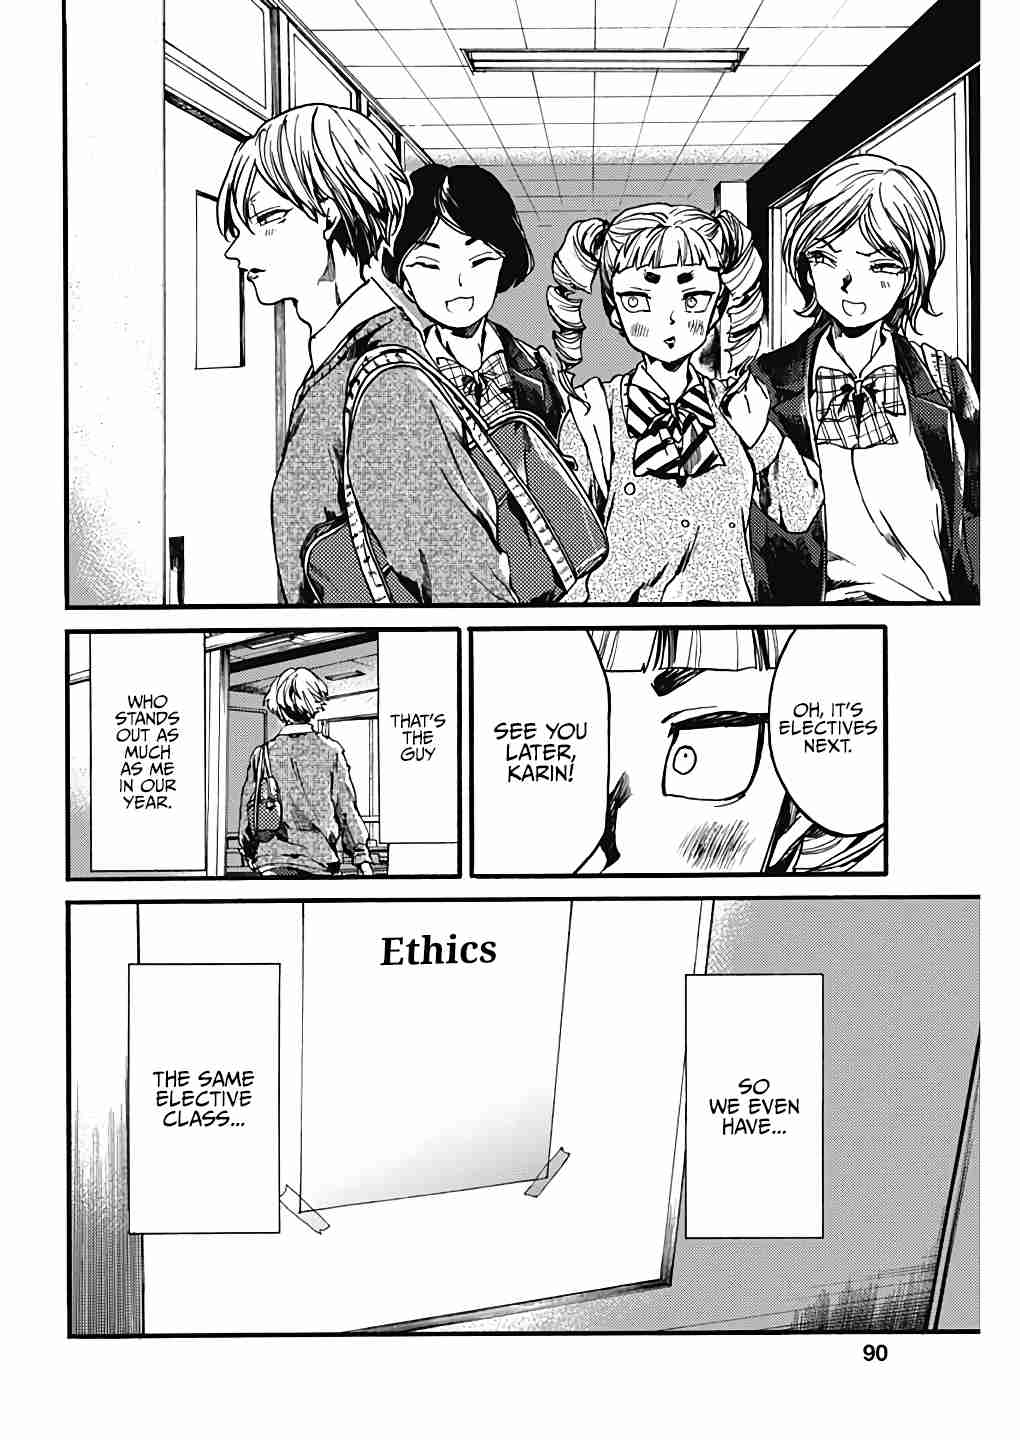 We Shall Now Begin Ethics Ch. 21